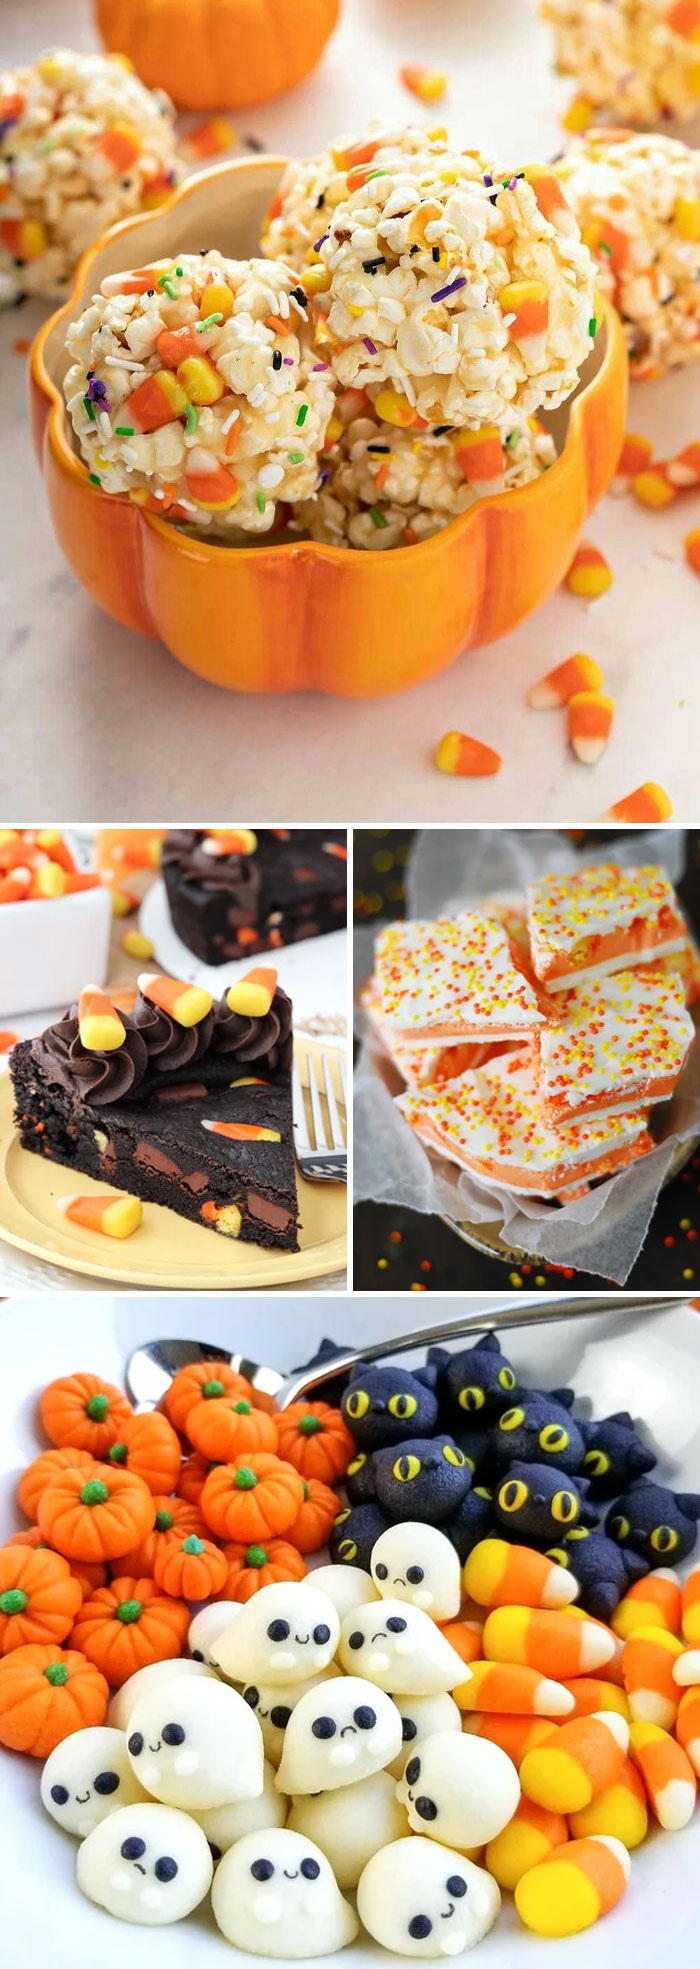 Candy Corn Isn't Exactly Beloved For Its Flavor, But You Can't Beat How Good It Looks In Everything